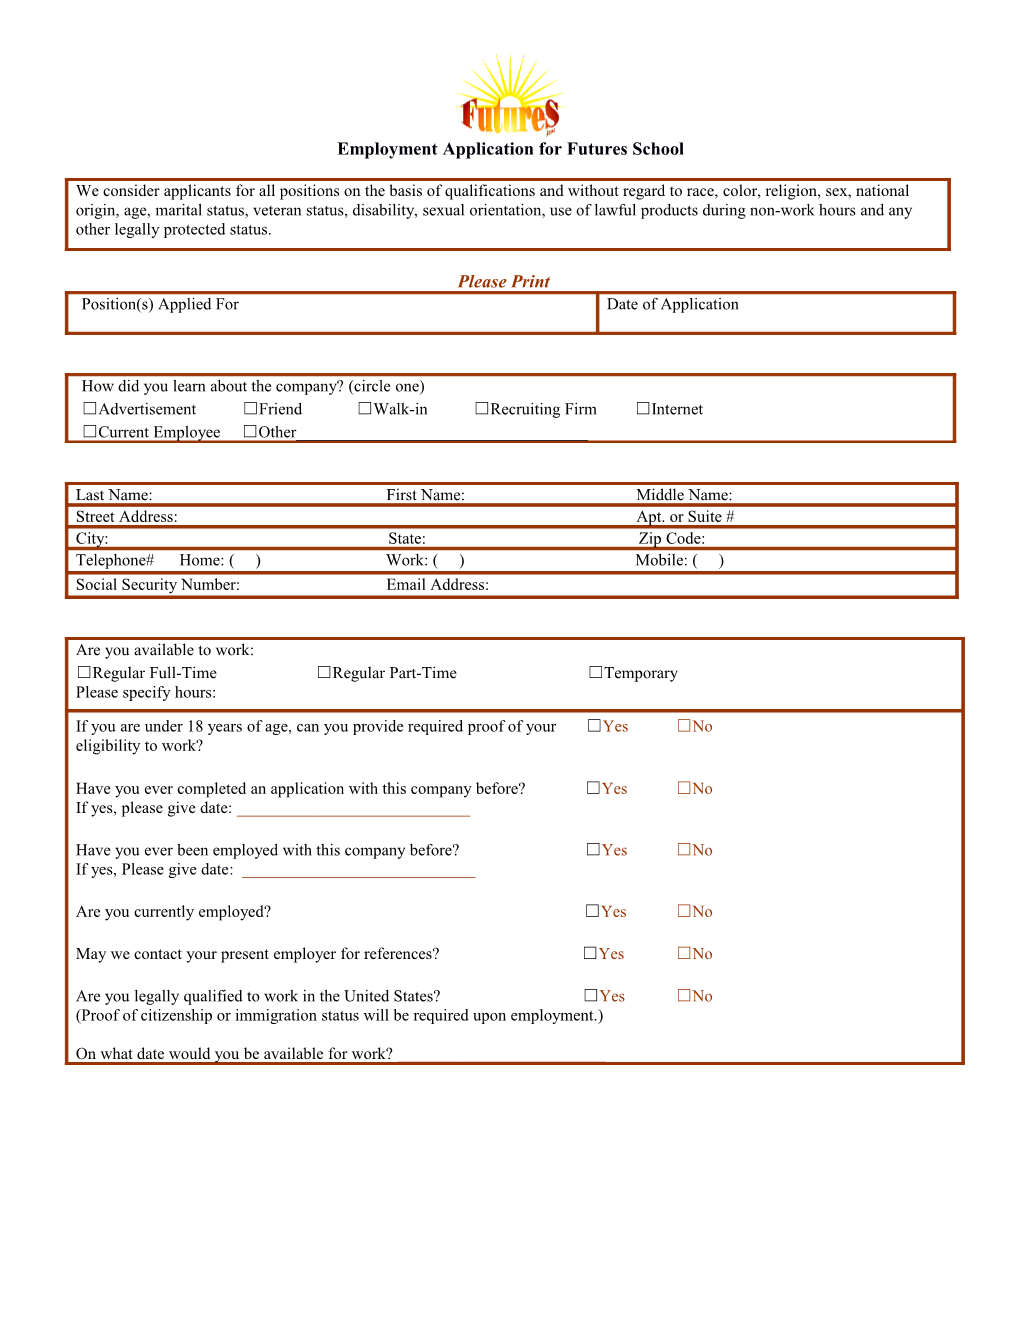 Employment Application for Futures School